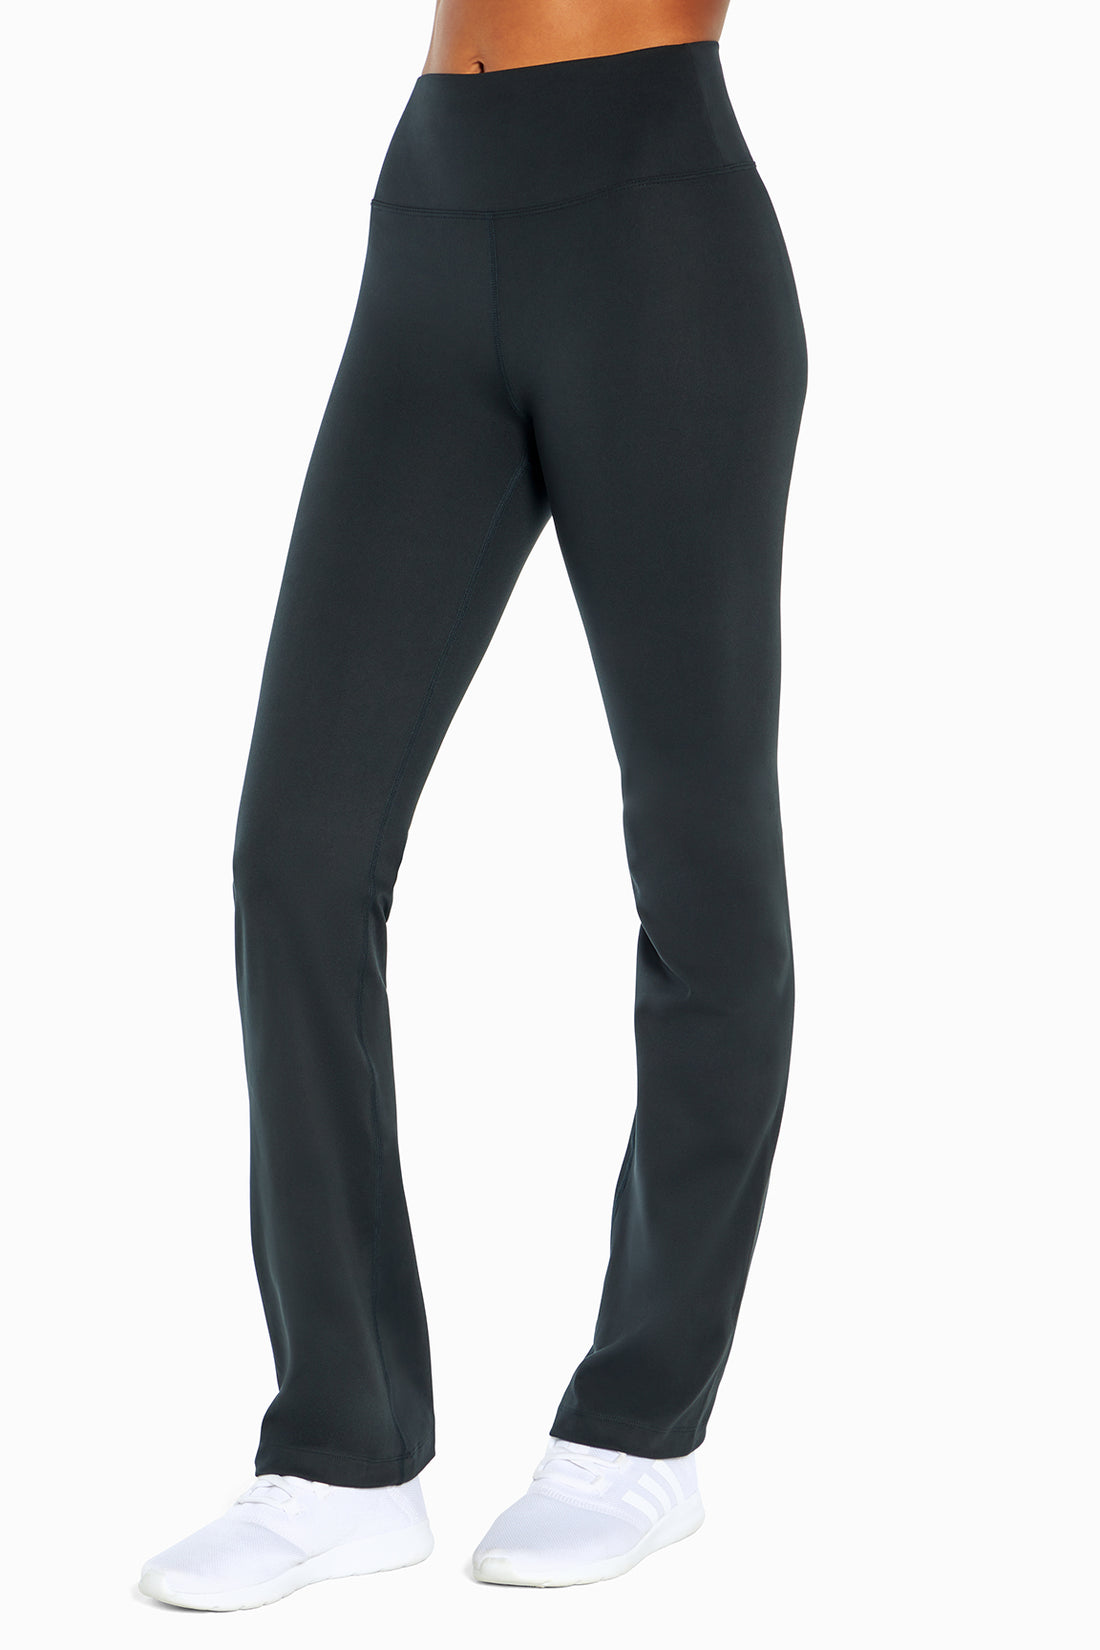 Harmony & Balance Leggings Multiple Size L - $18 (60% Off Retail) - From  Kirsten